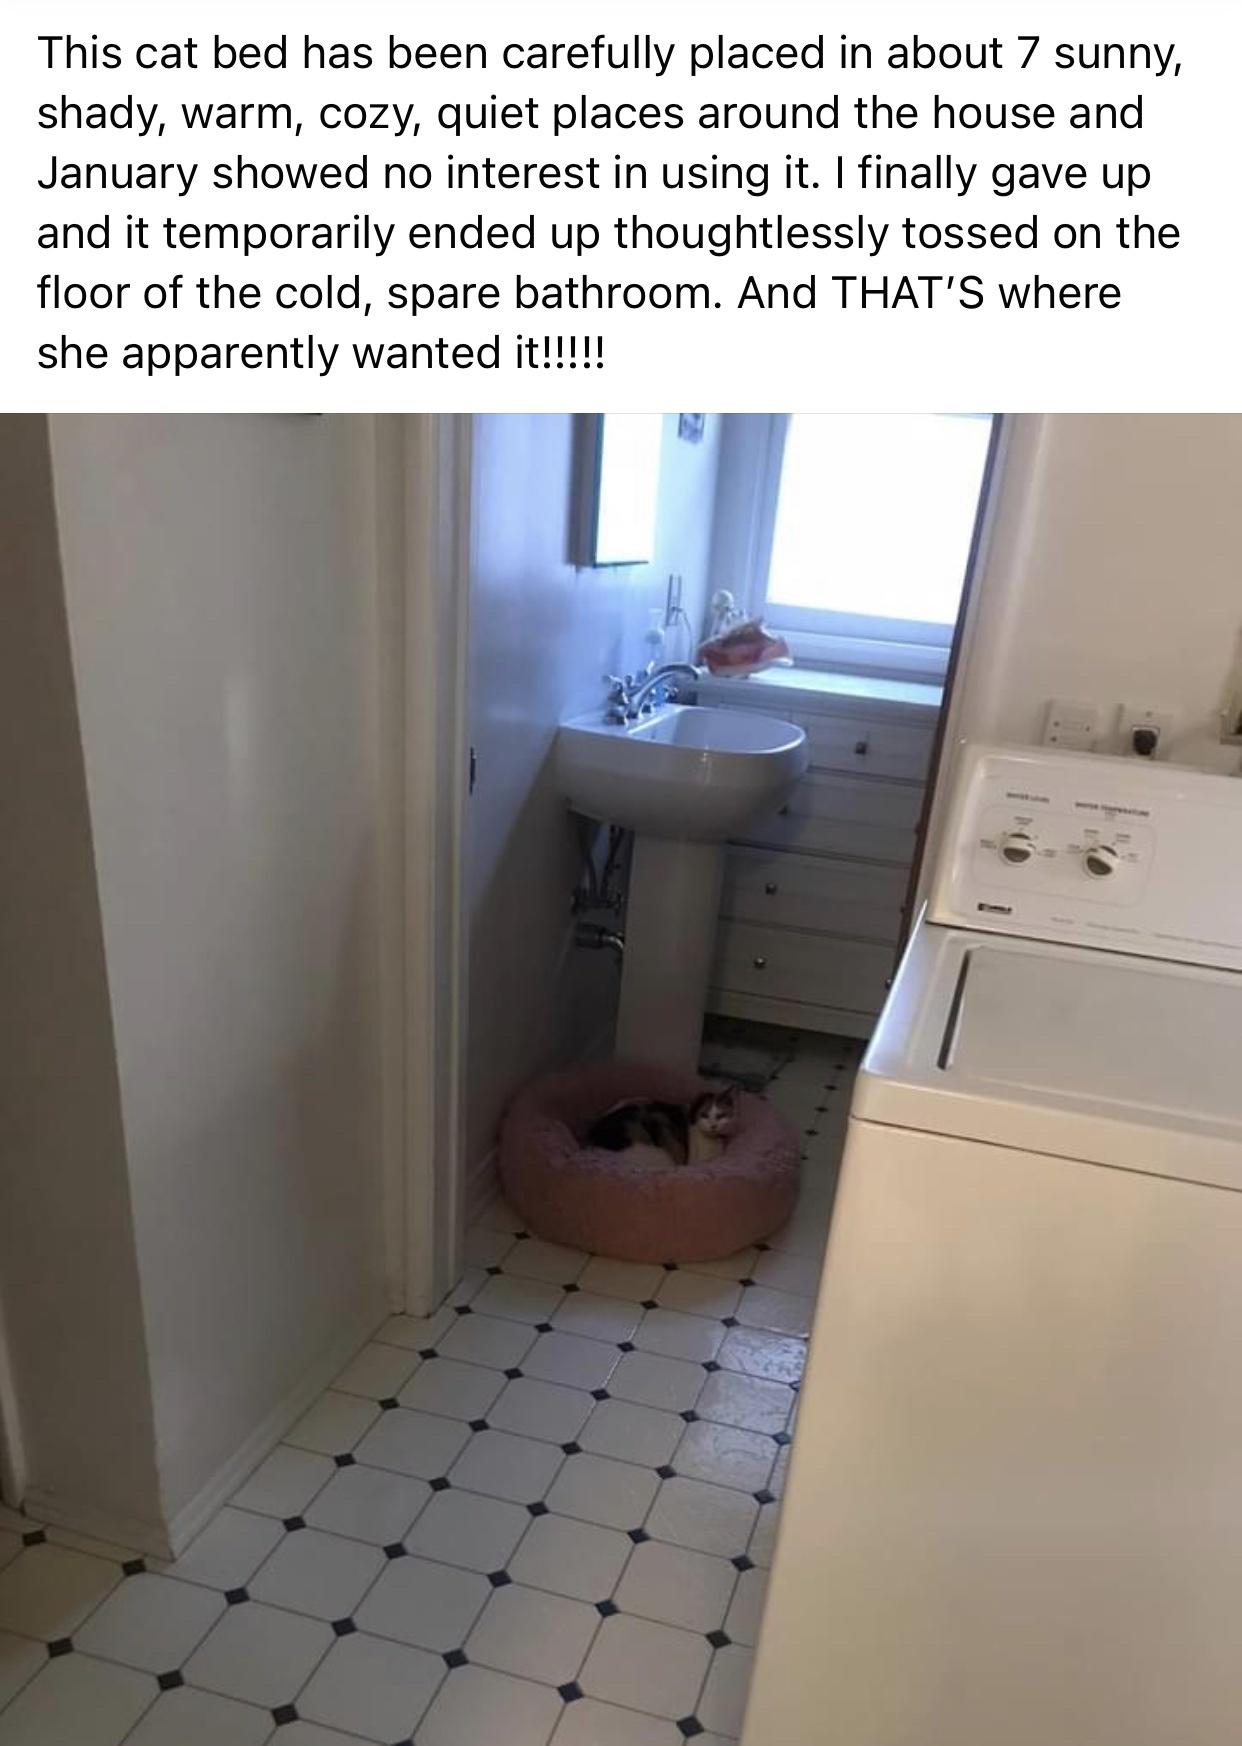 funny memes - dank memes - floor - This cat bed has been carefully placed in about 7 sunny, shady, warm, cozy, quiet places around the house and January showed no interest in using it. I finally gave up and it temporarily ended up thoughtlessly tossed on 